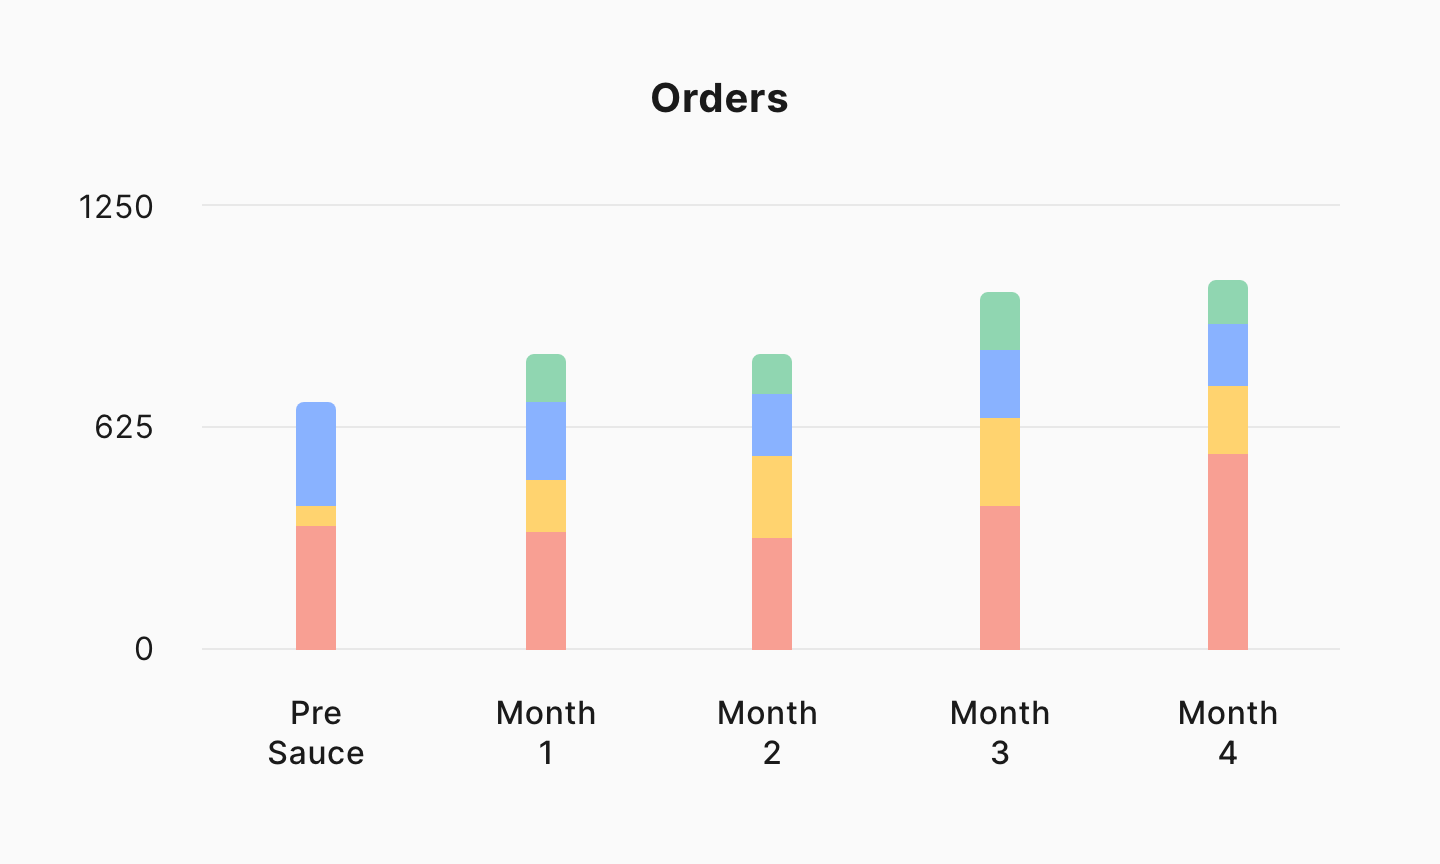 Bar graph showing month over month increase in revenue for Rachel’s Kitchen using Sauce dynamic pricing